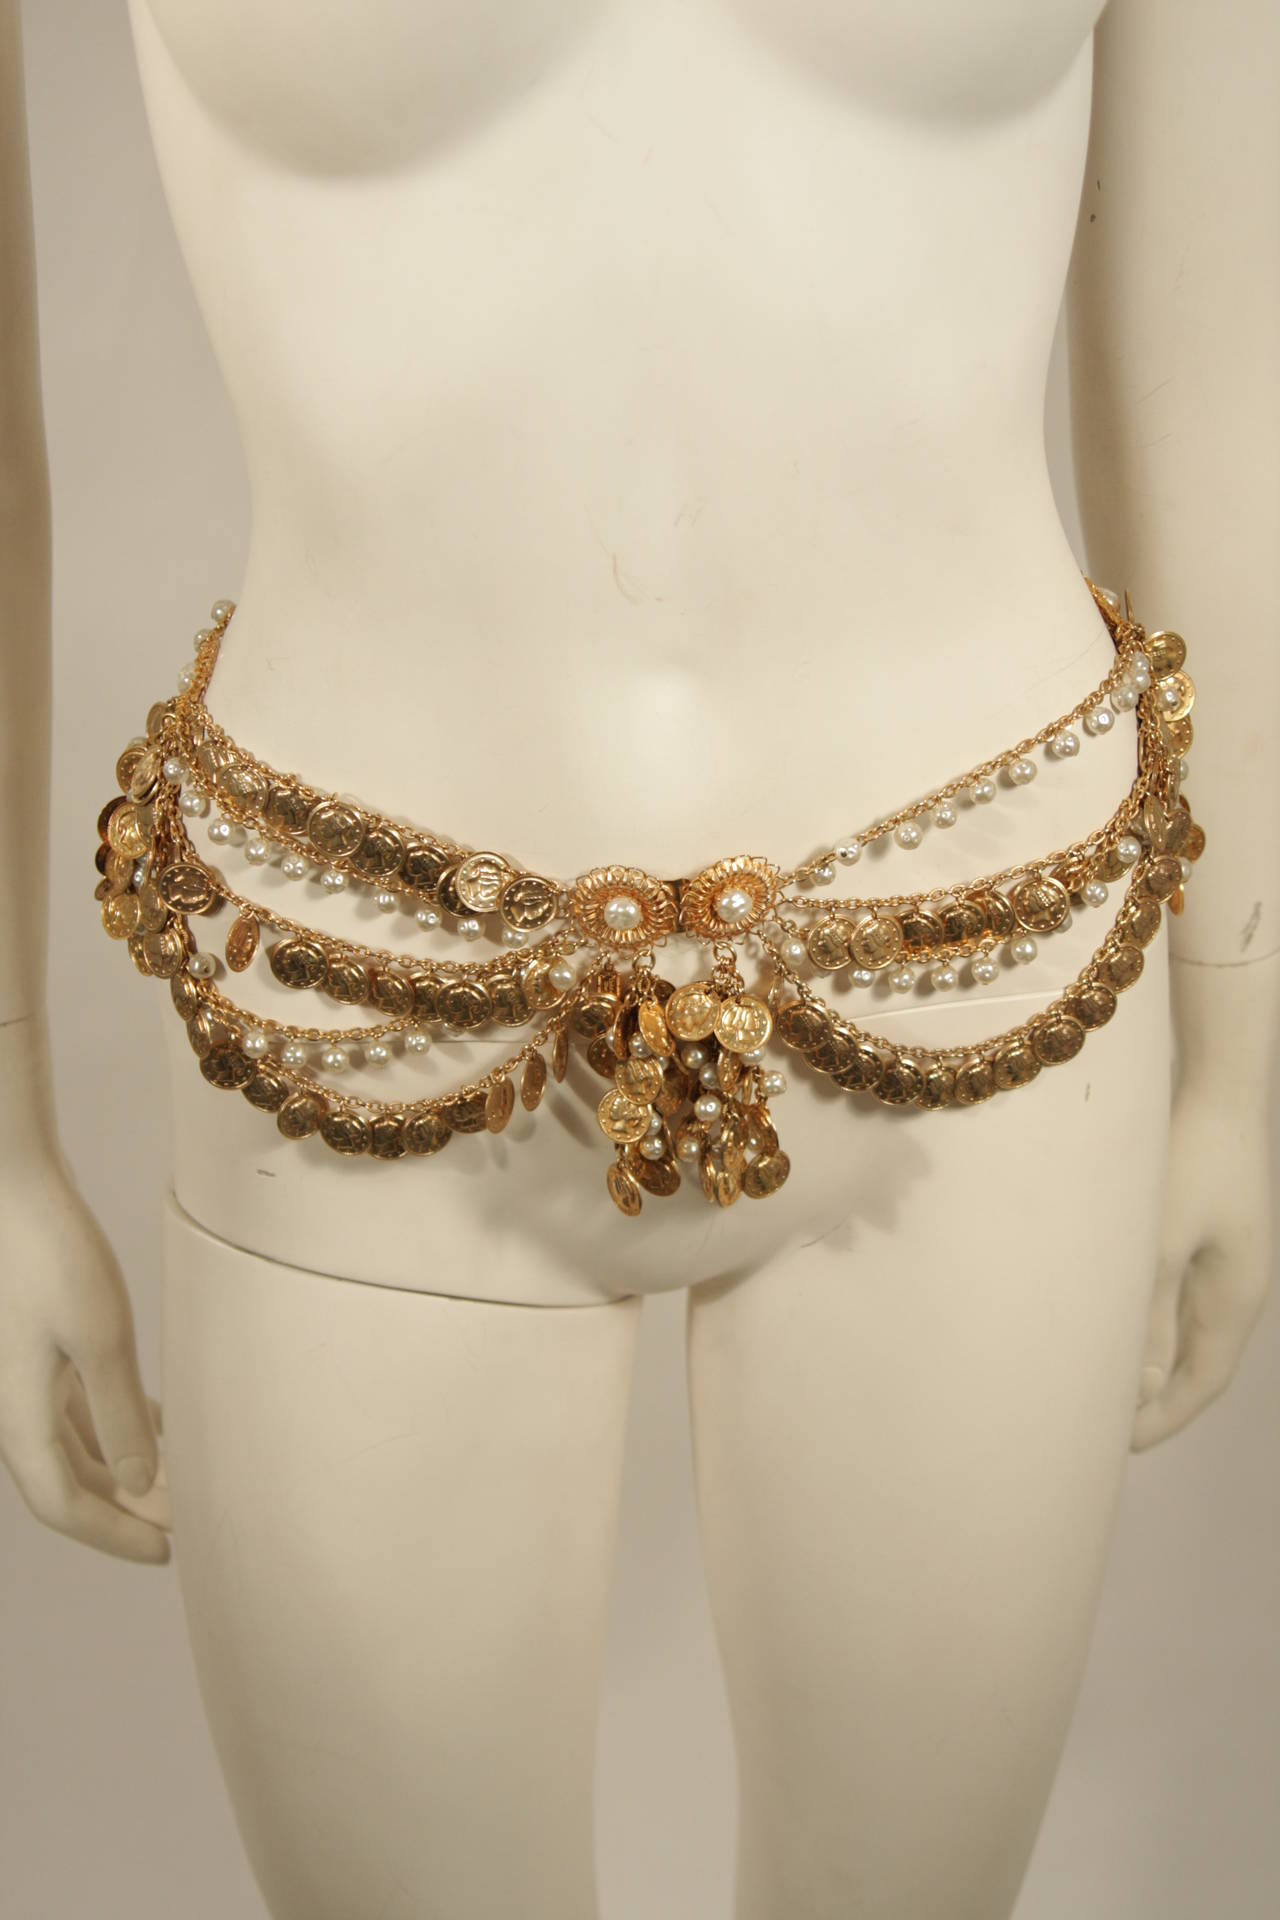 Christian Dior  Belt with Gold Coin and Pearl Design 26.5